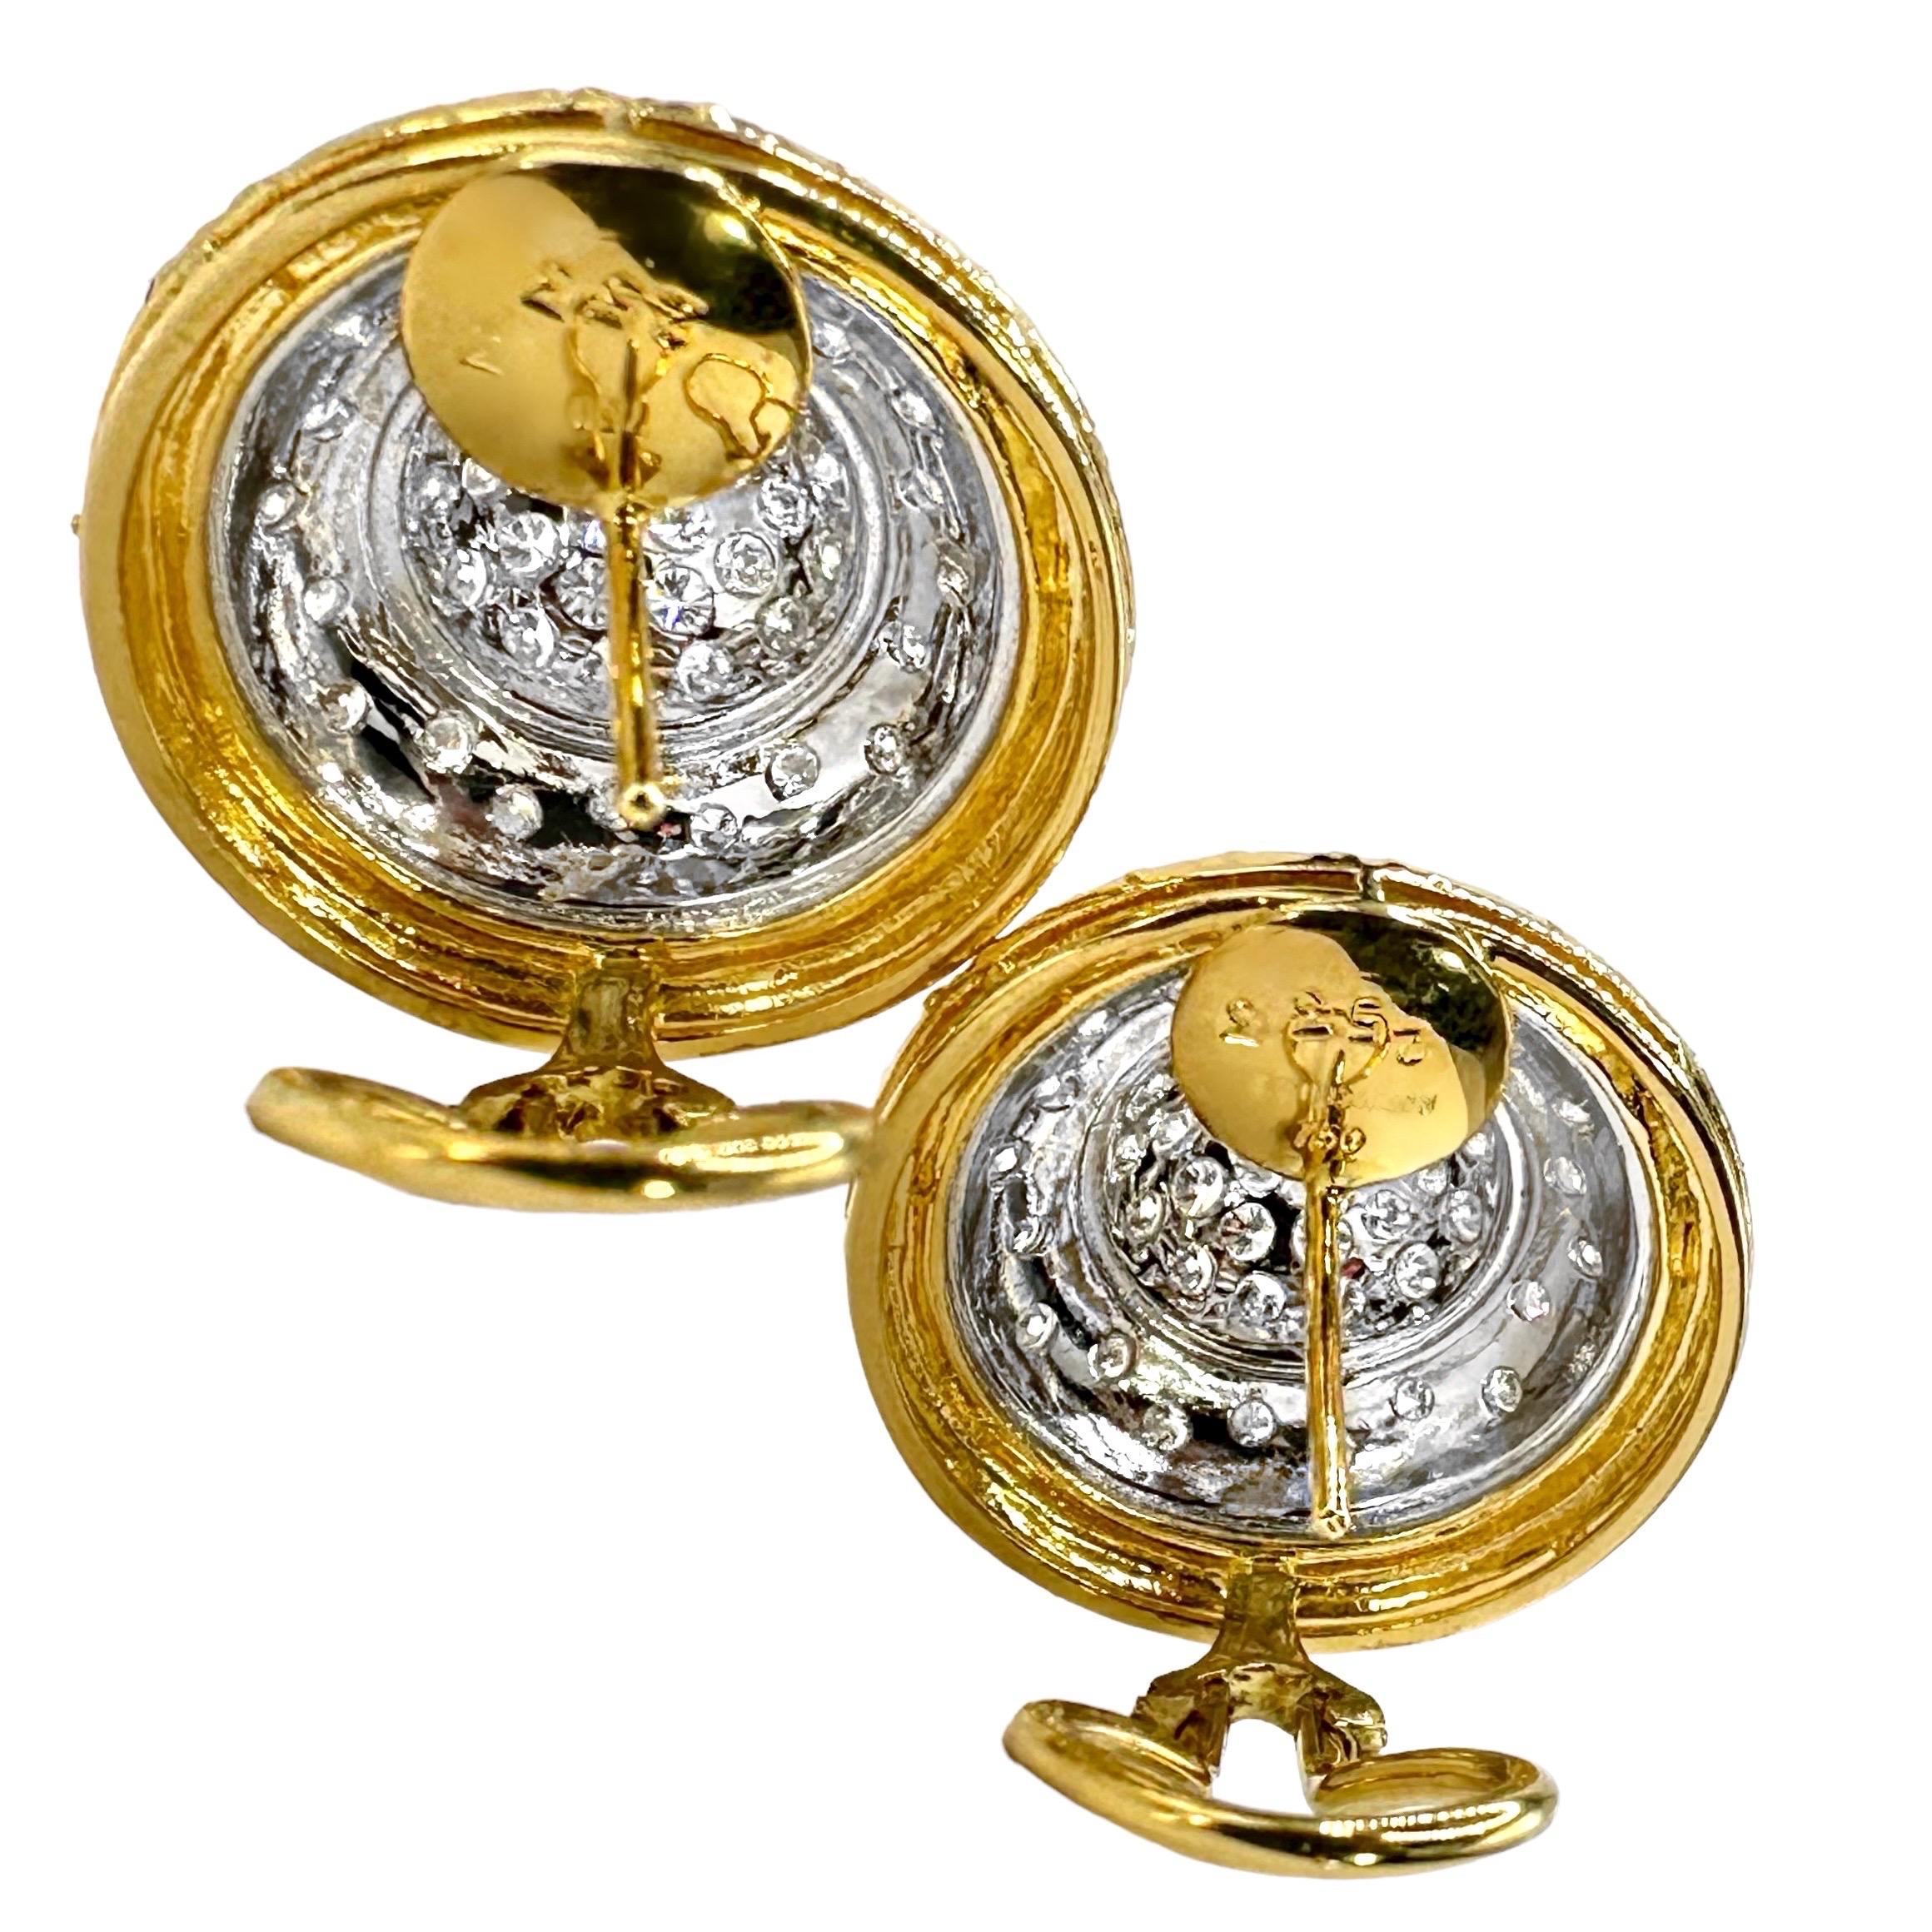 18K Stylish & Tailored Gold & Diamond Encrusted Dome Earrings 7/8 Inch Diameter In Excellent Condition For Sale In Palm Beach, FL